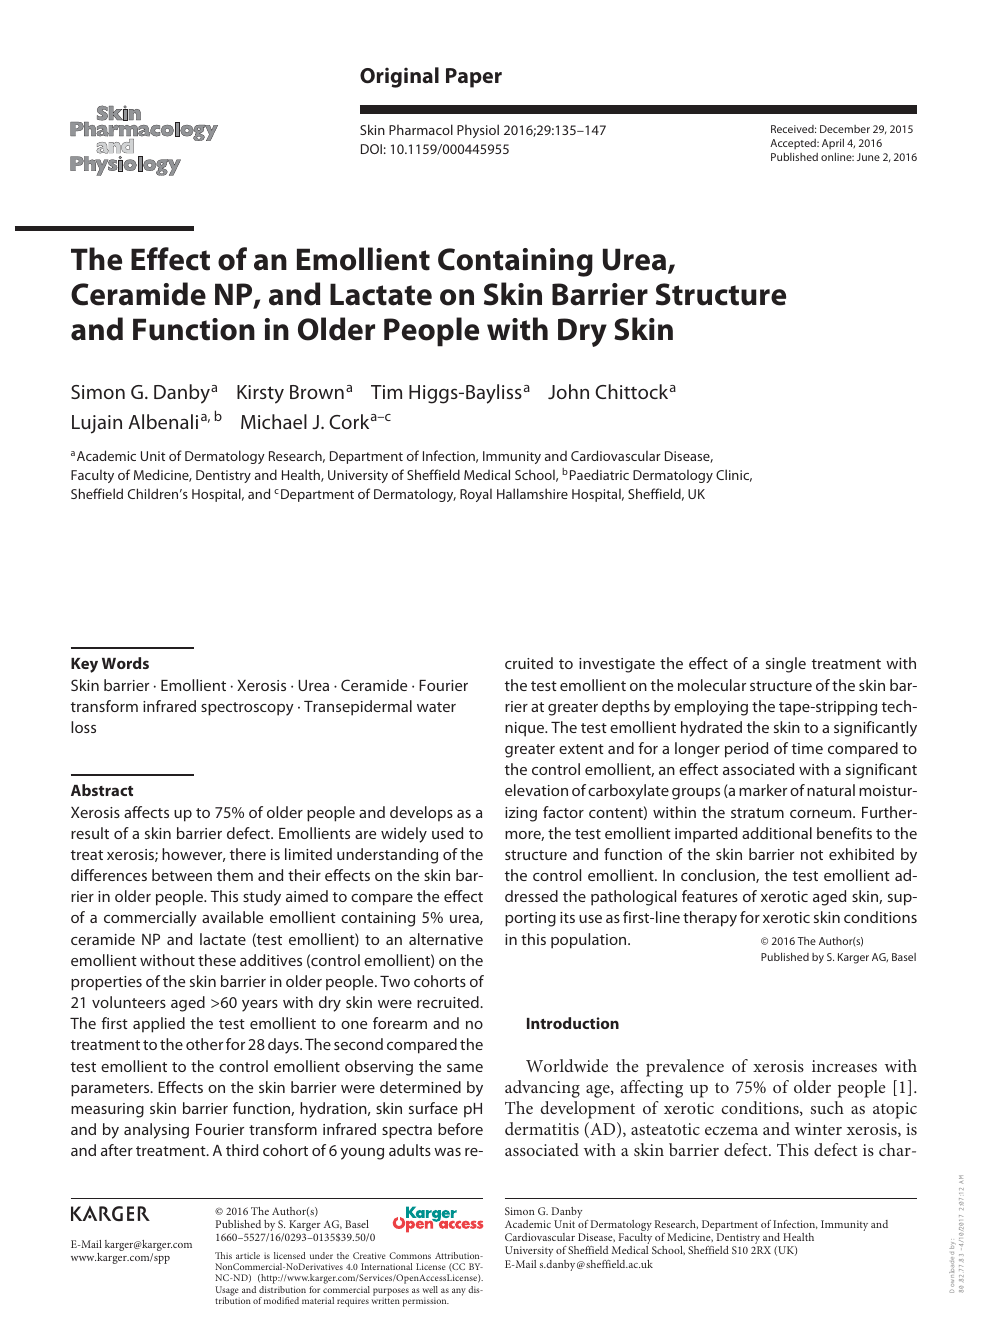 The Effect Of An Emollient Containing Urea Ceramide Np And Lactate On Skin Barrier Structure And Function In Older People With Dry Skin Topic Of Research Paper In Clinical Medicine Download